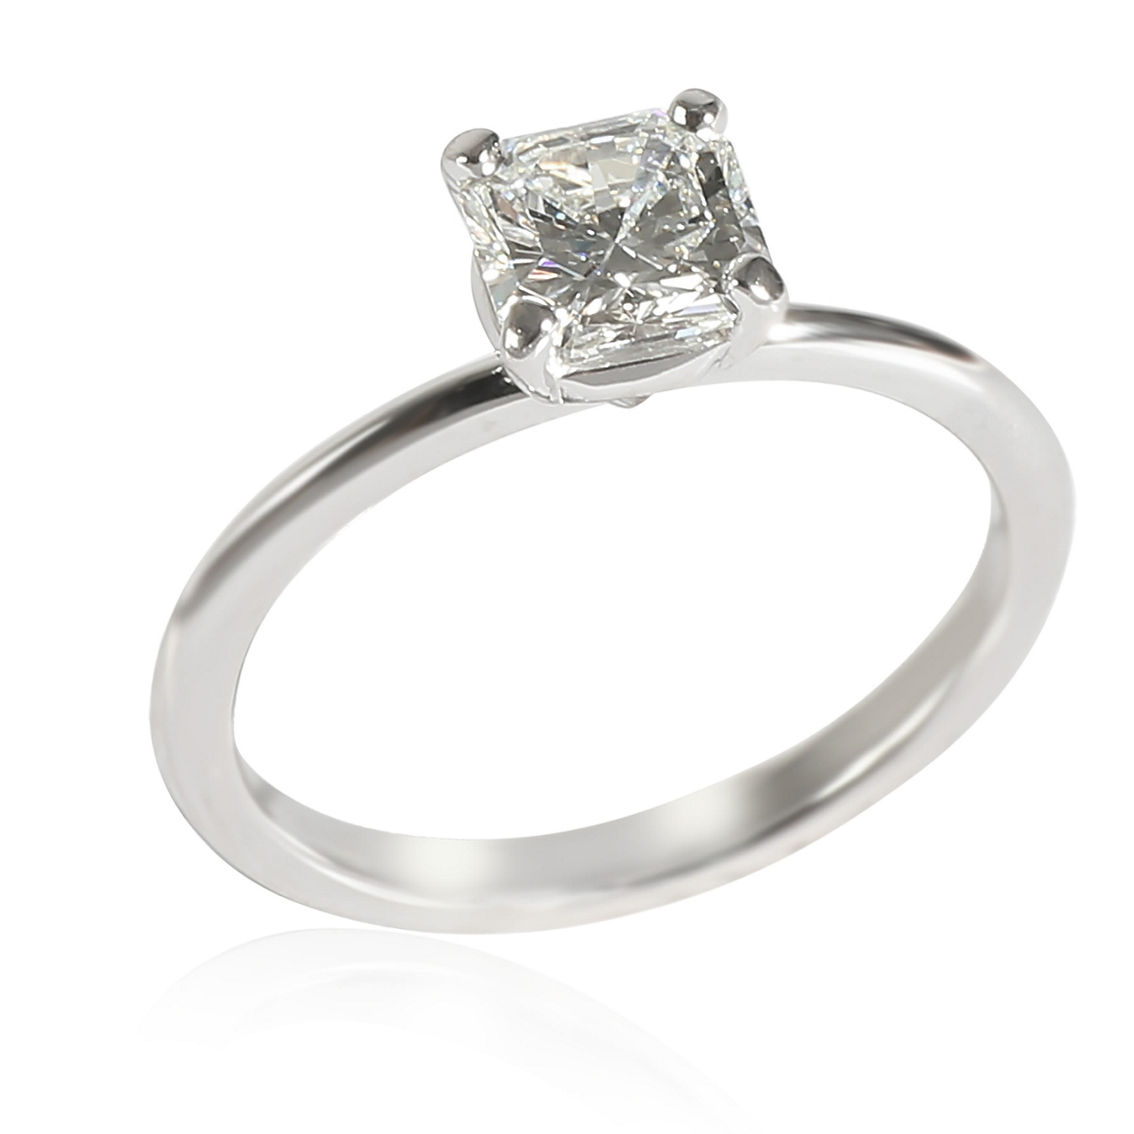 Tiffany & Co. Tiffany True Engagement Ring Pre-Owned - Image 3 of 4